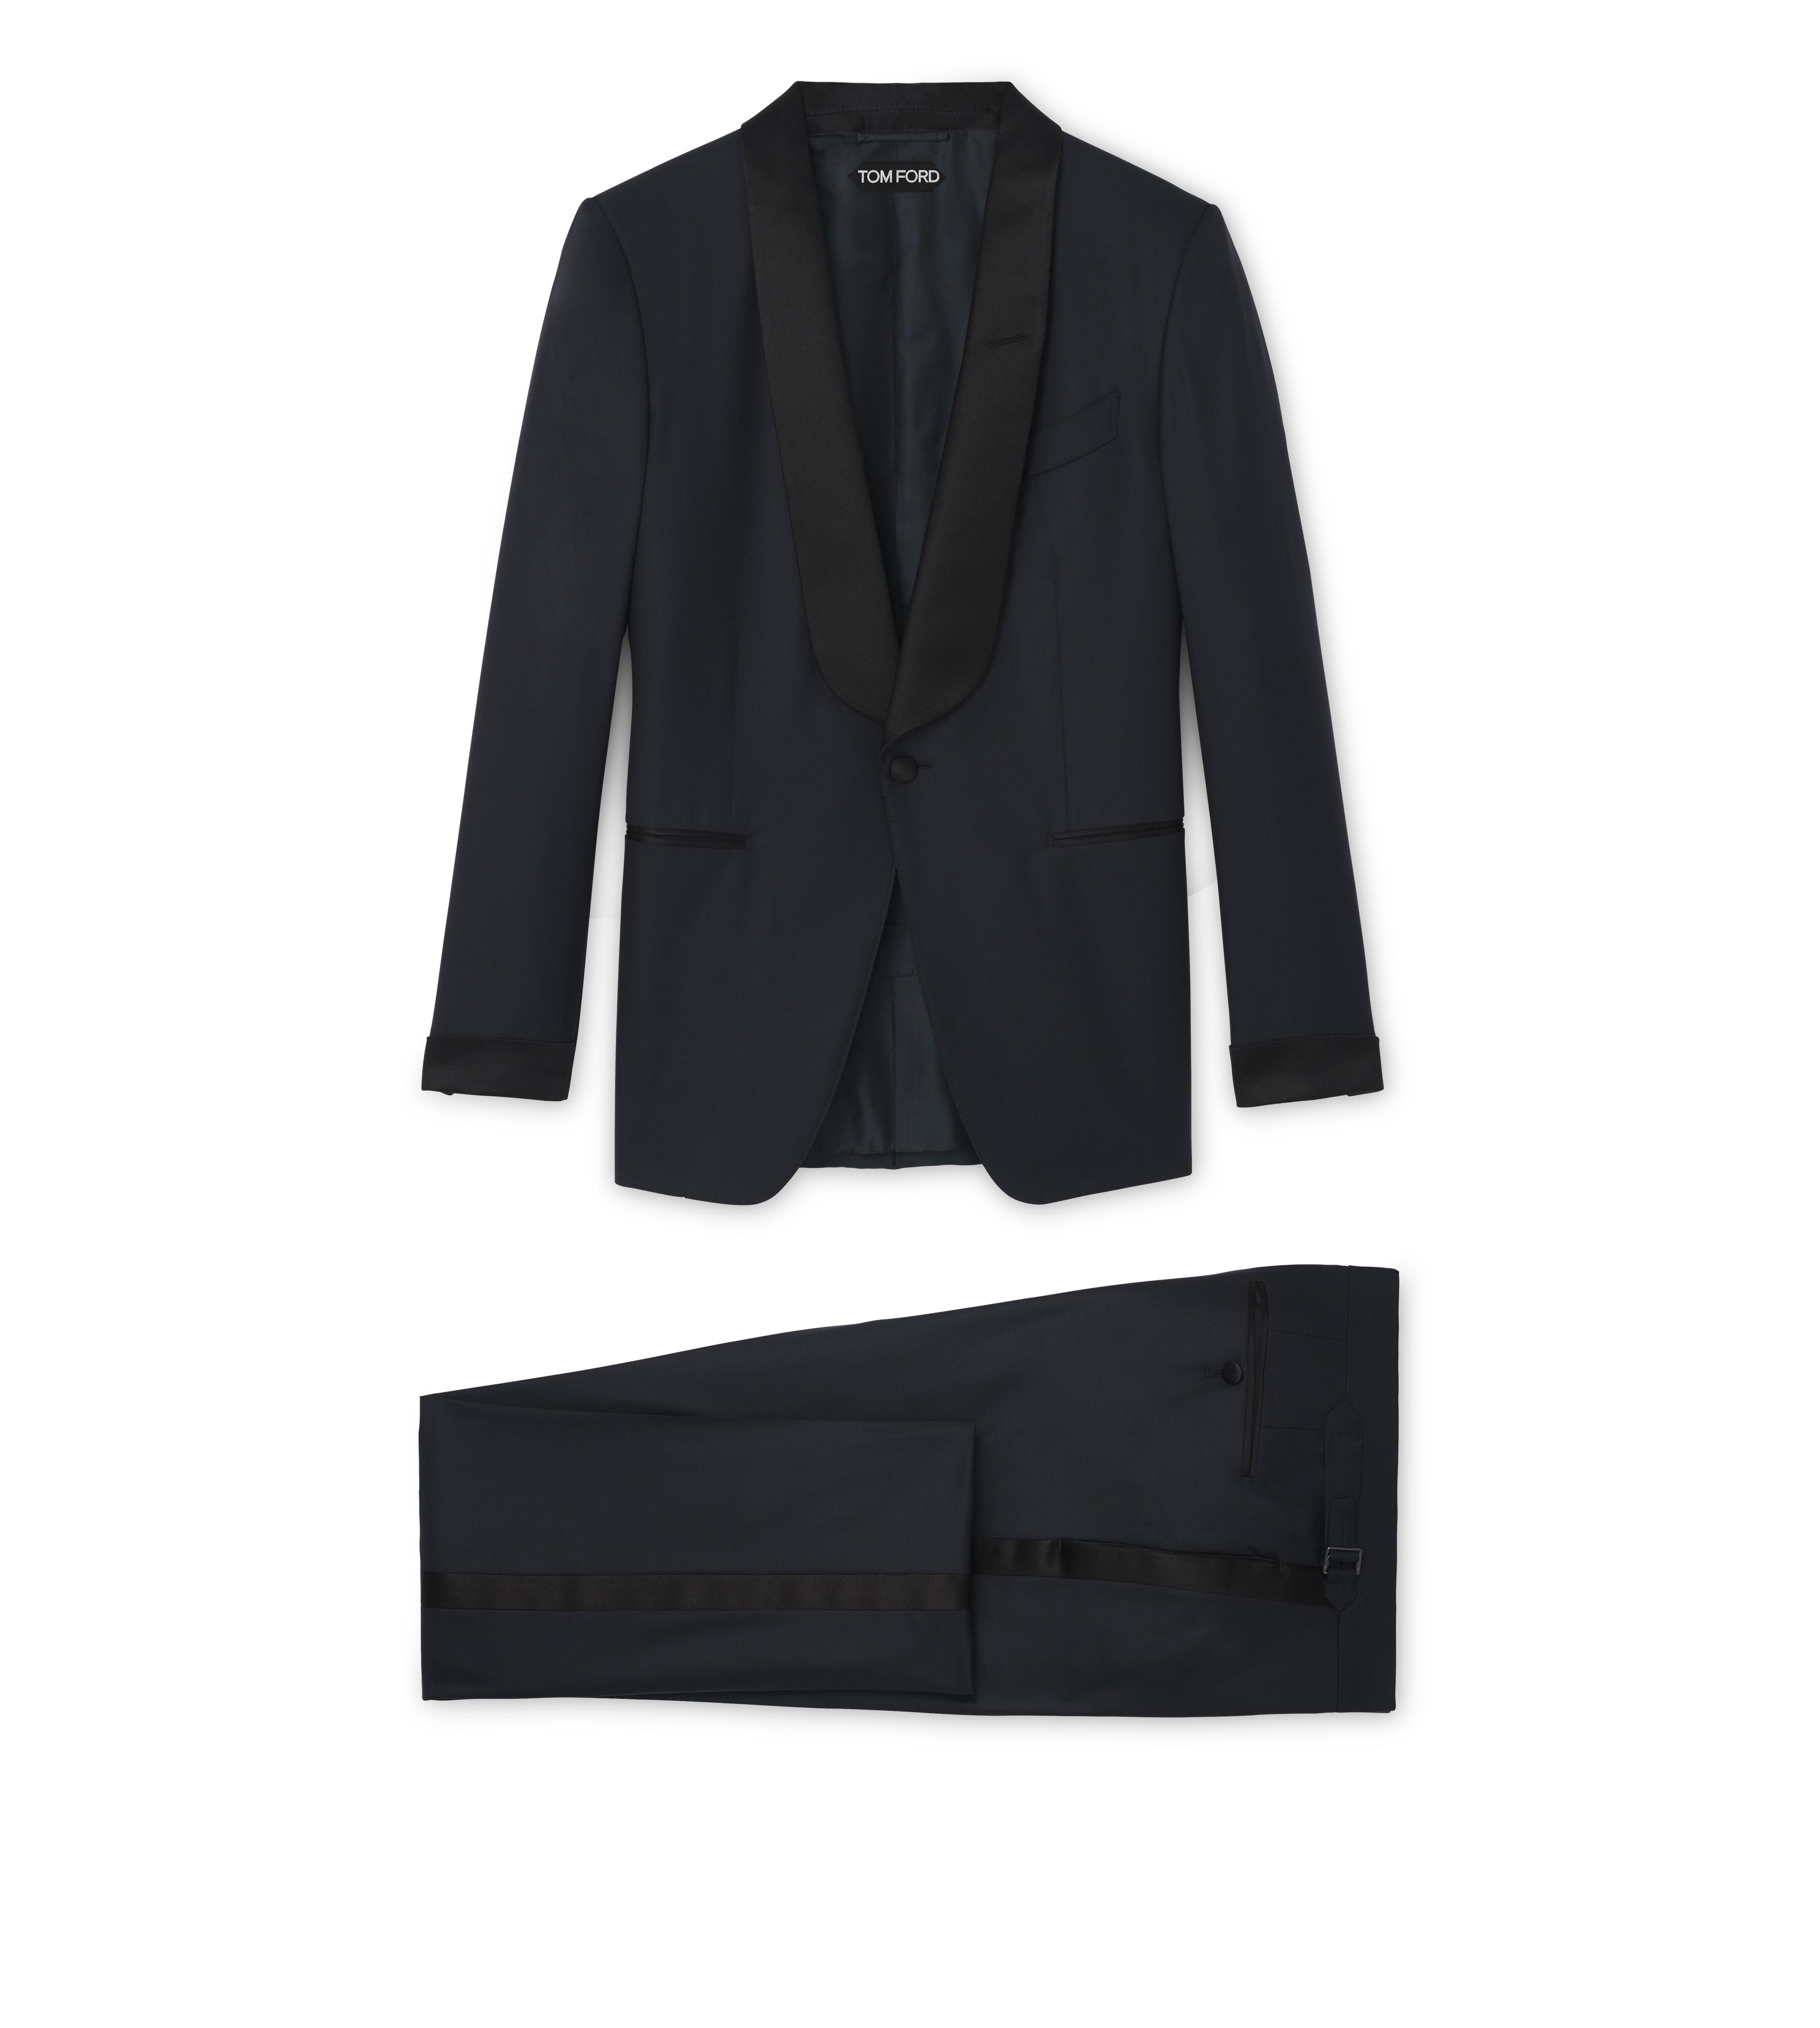 Pastor mager glimt Tom Ford NAVY TWILL O'CONNOR TUXEDO | TomFord.com